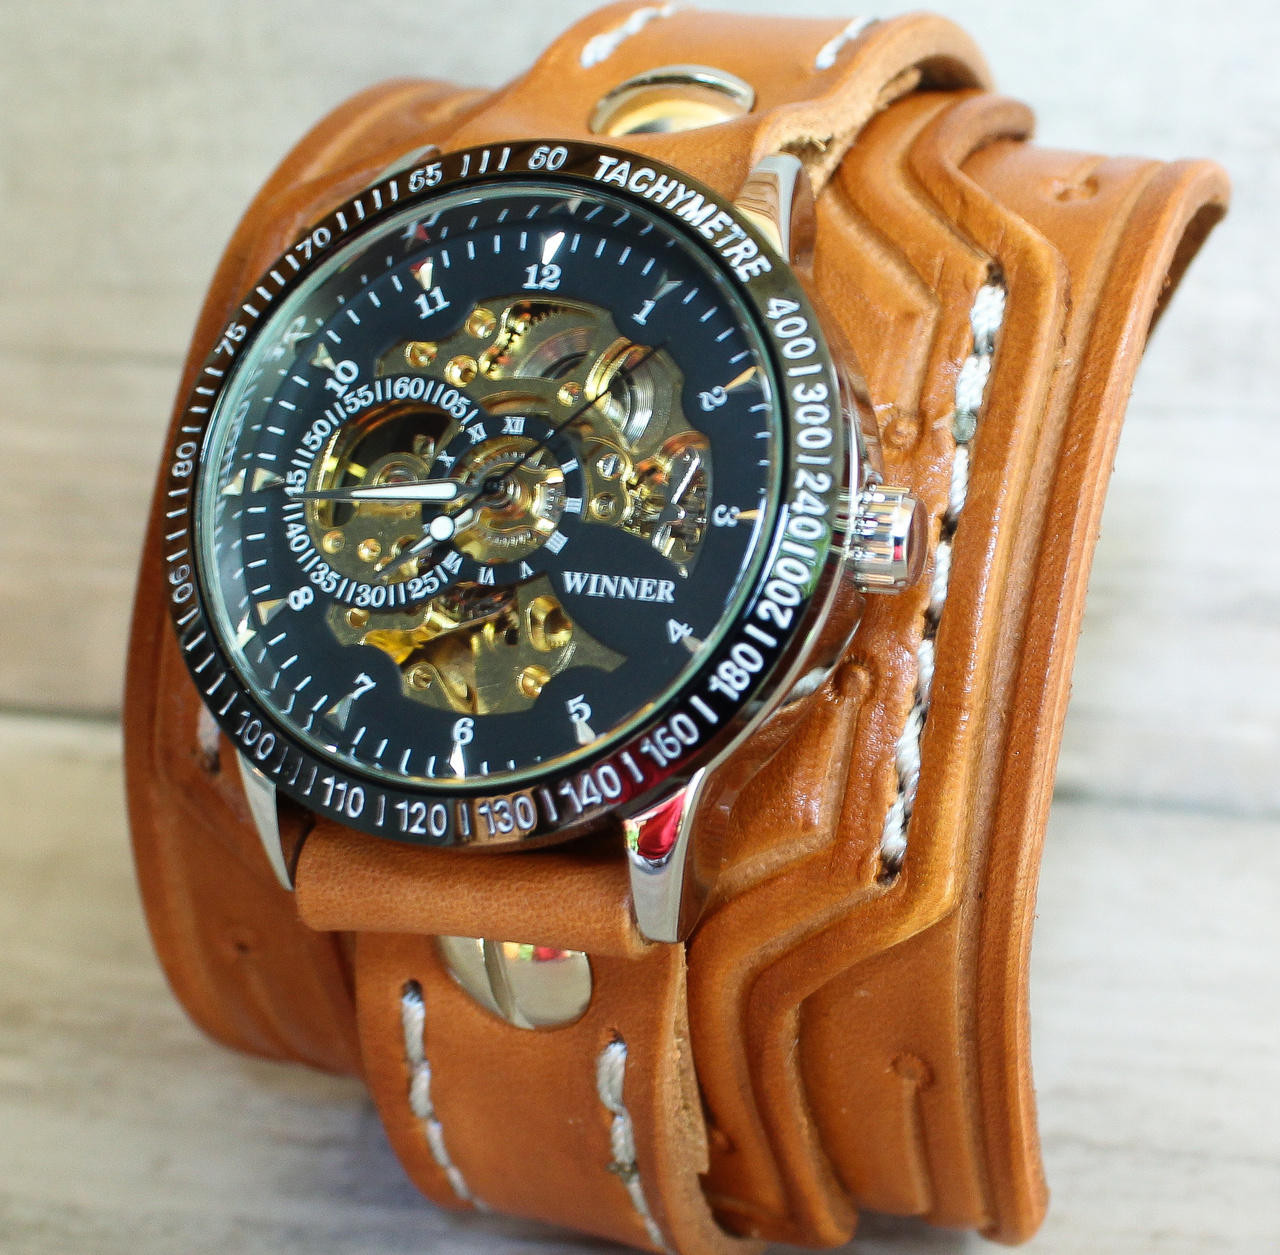 Steampunk leather watch with leather cuff band